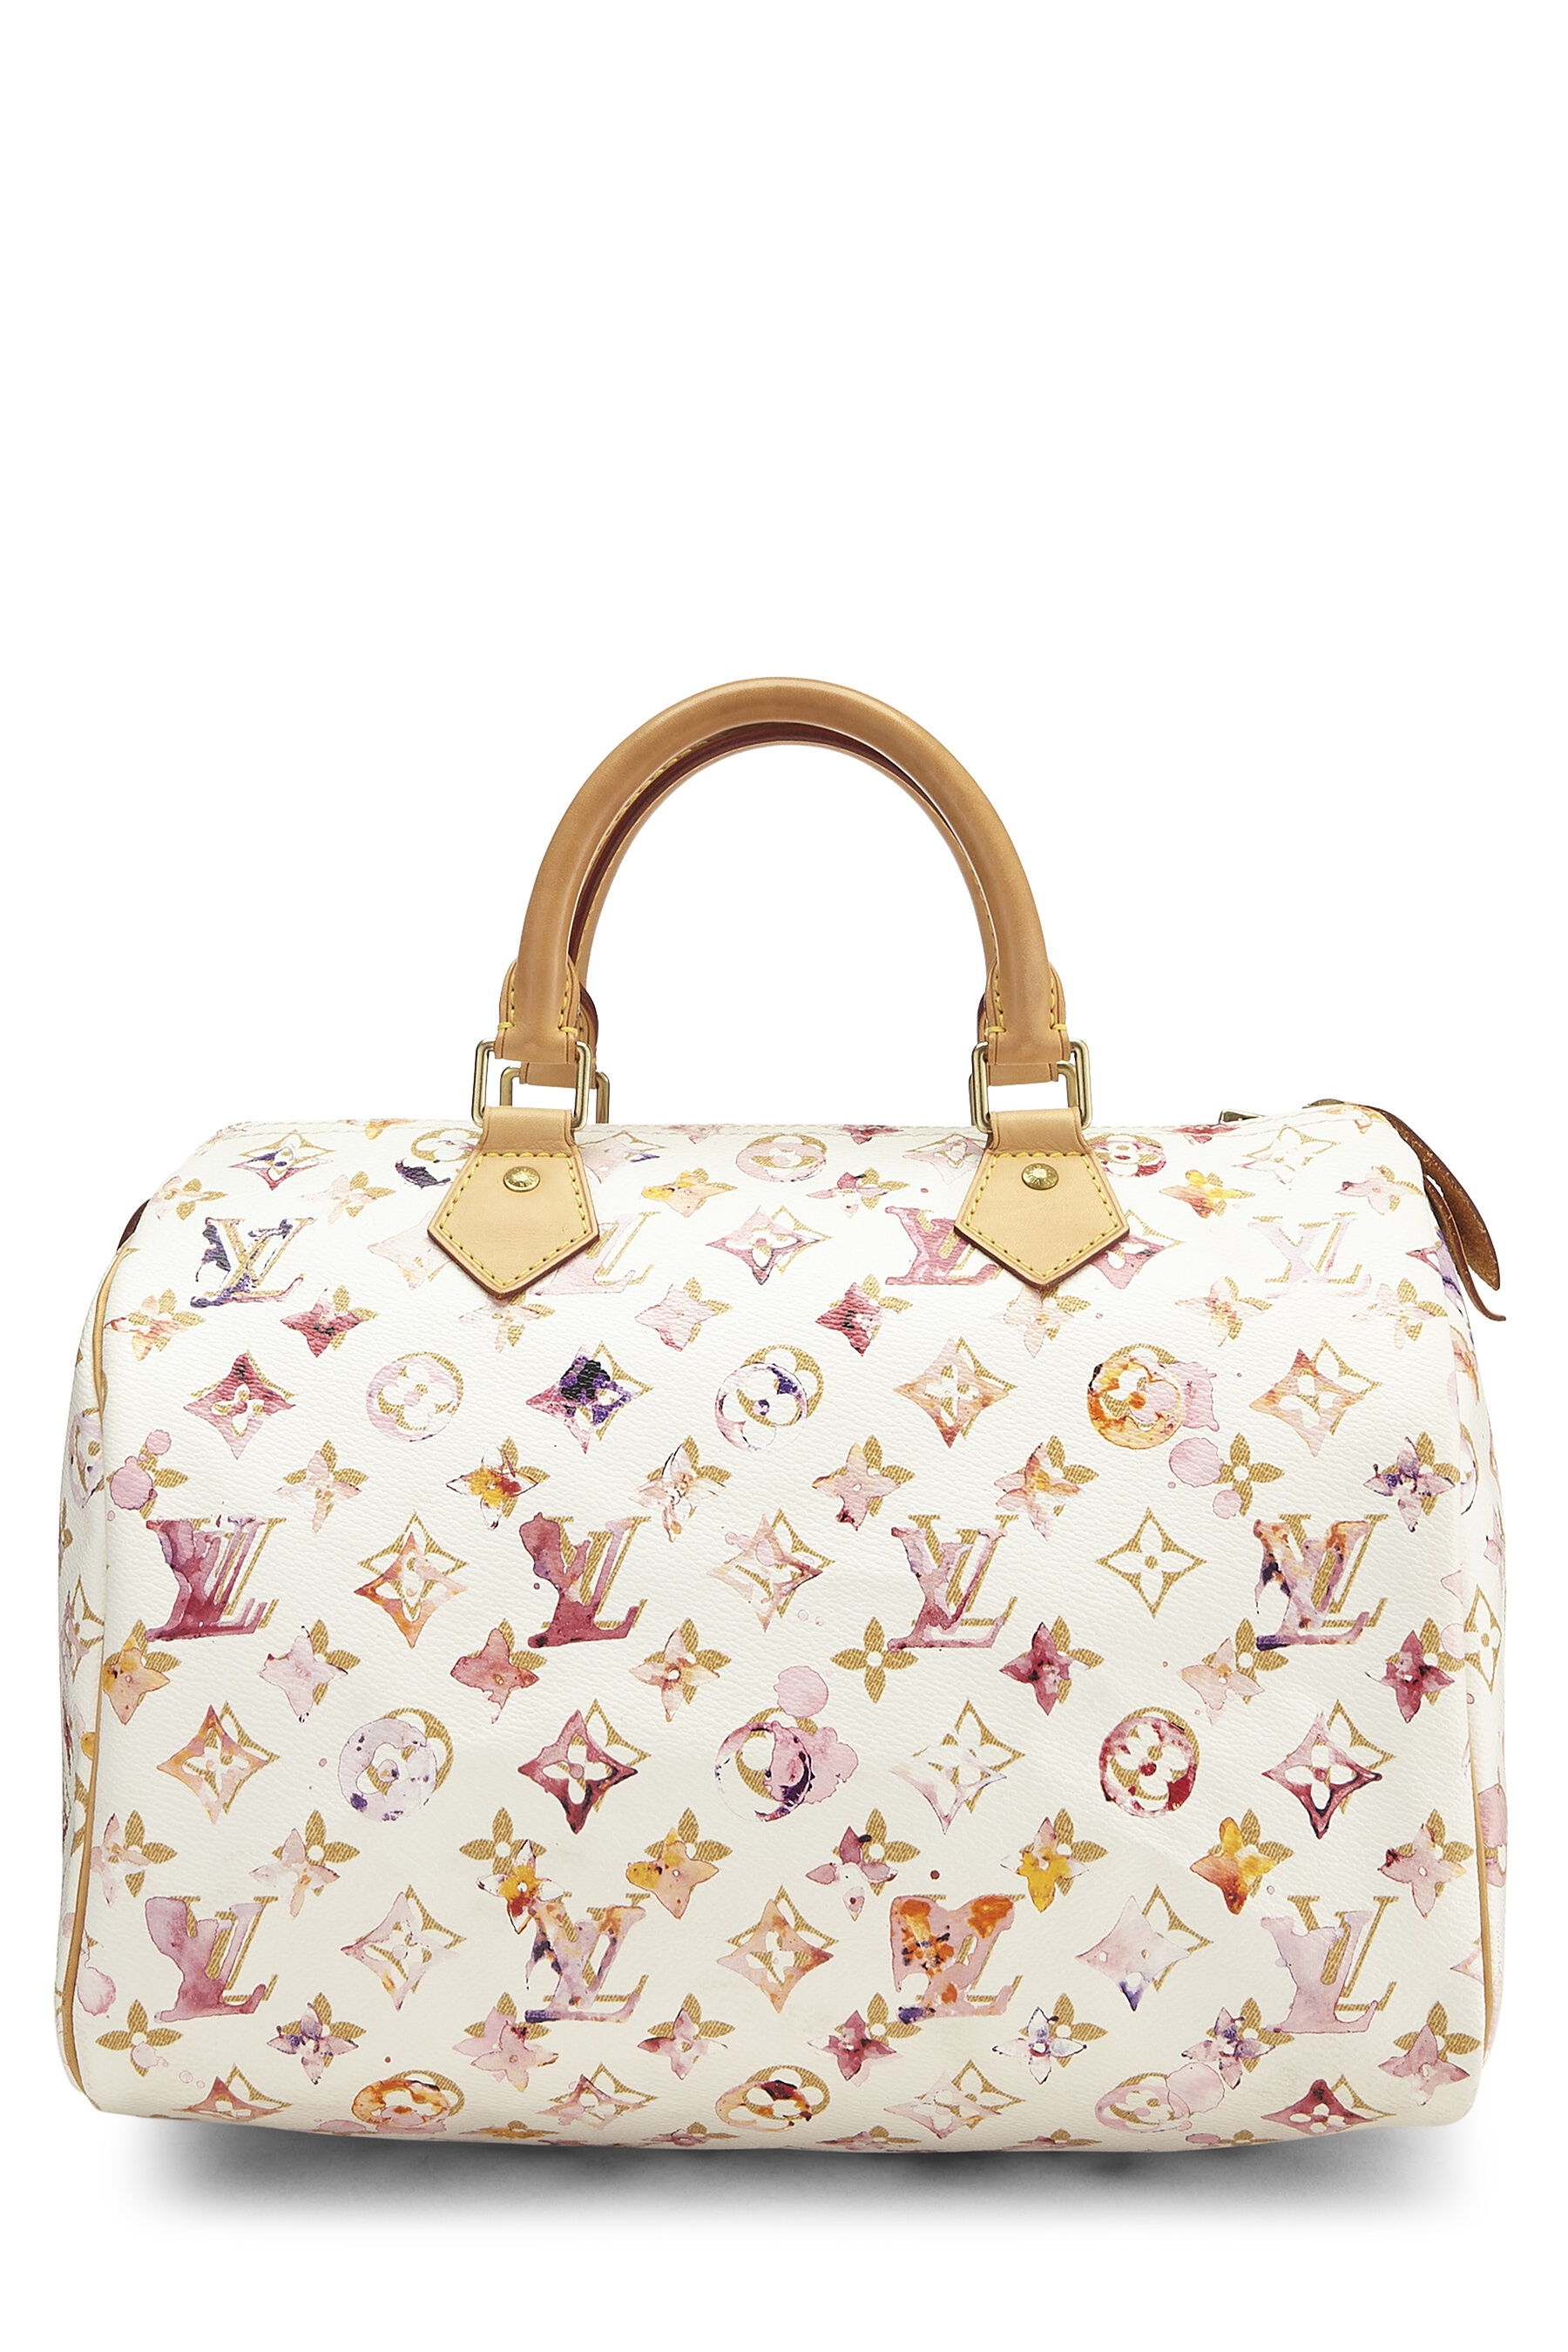 Louis Vuitton City Keepall Bag Limited Edition Monogram Watercolor